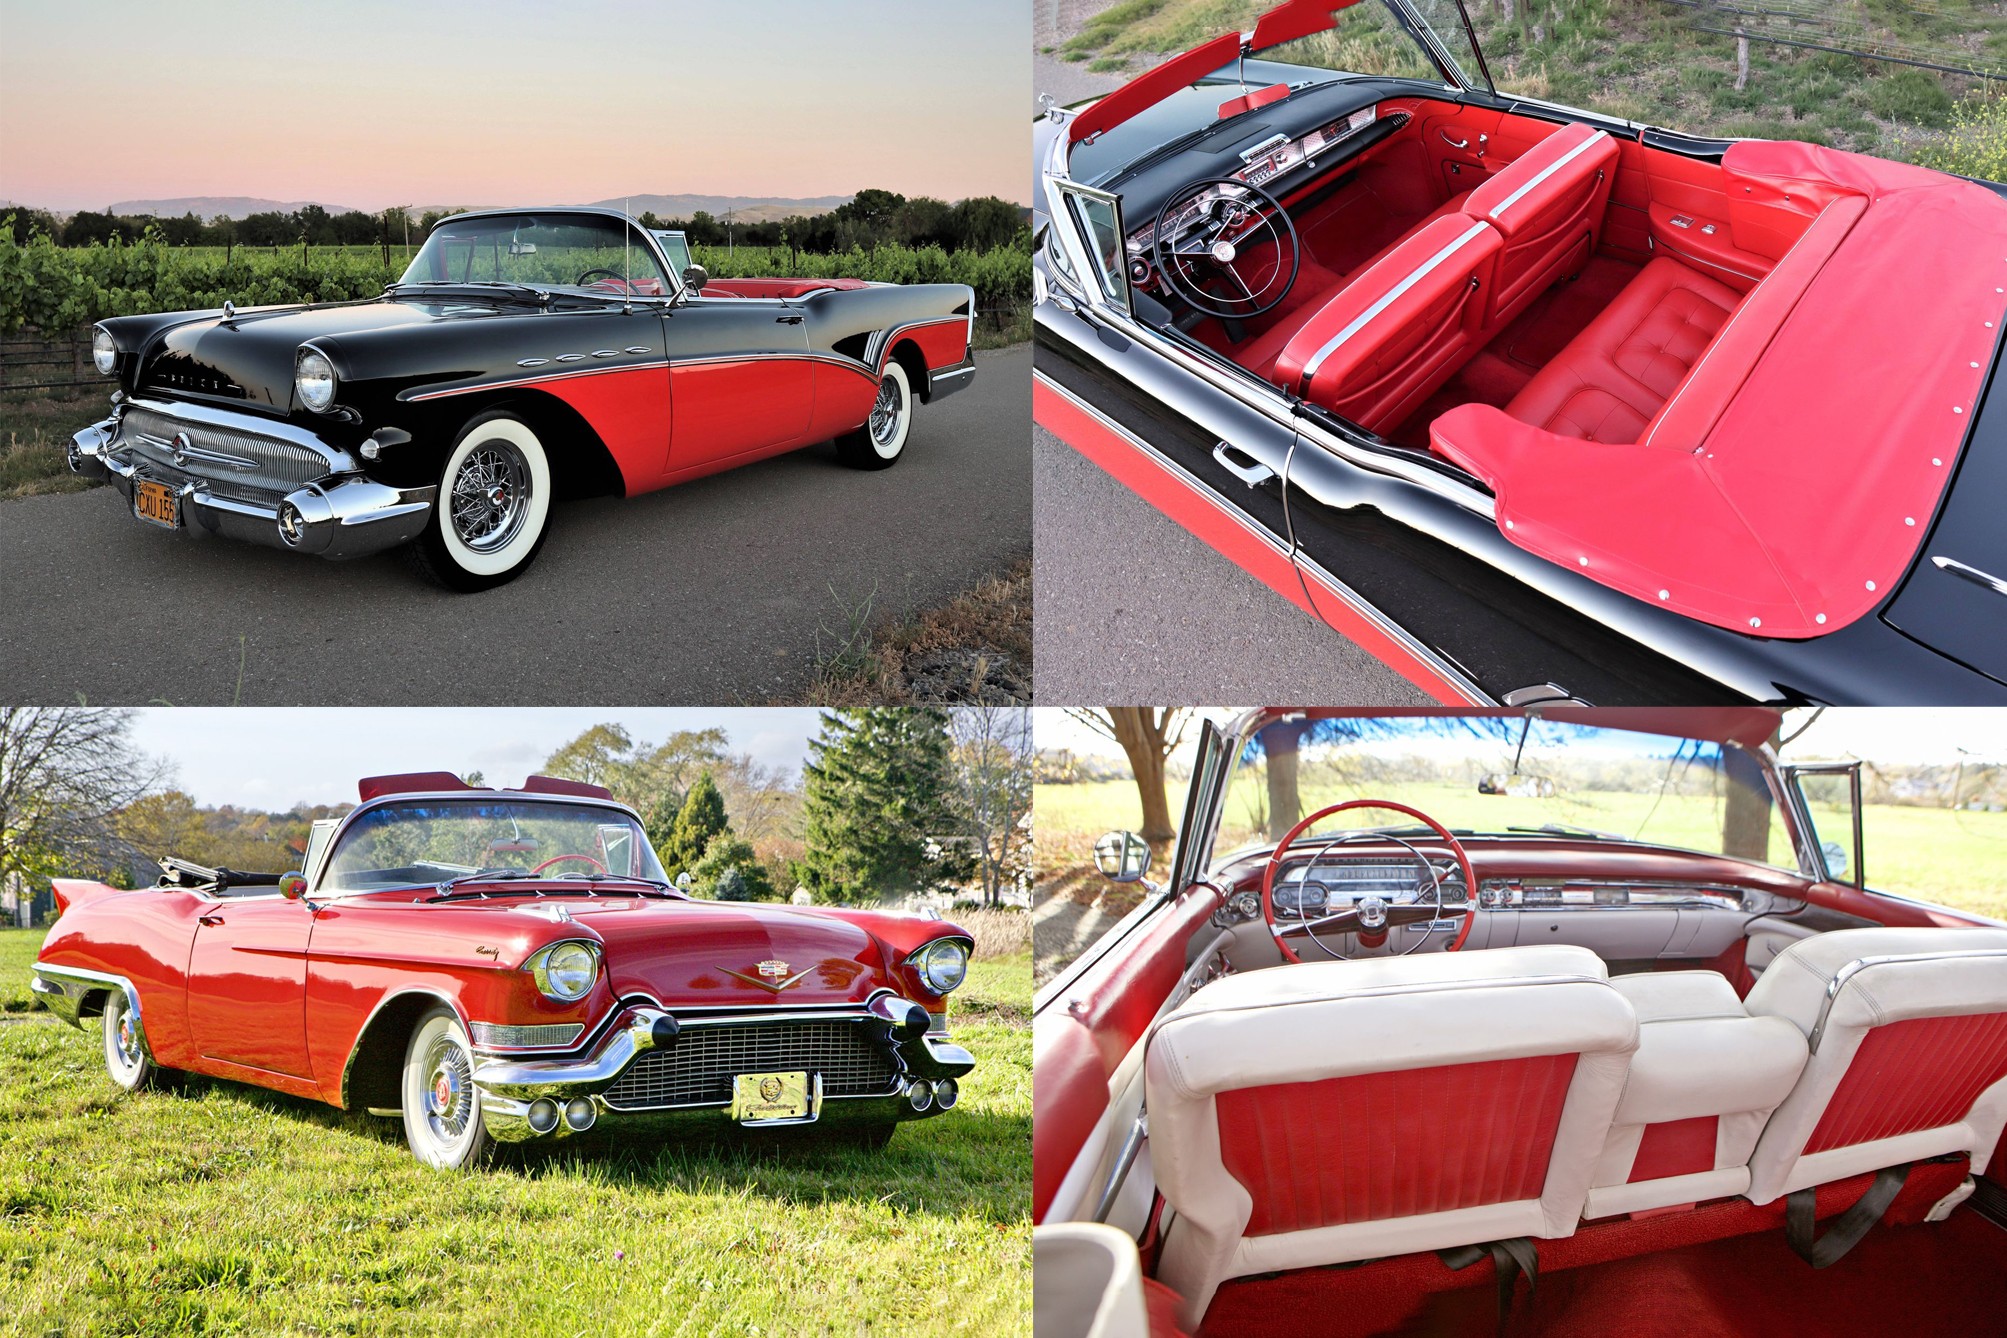 Find of the Day: 1957 Cadillac Eldorado Biarritz or 1957 Buick Roadmaster Model 76C, Which Classic Convertible Would You Choose?